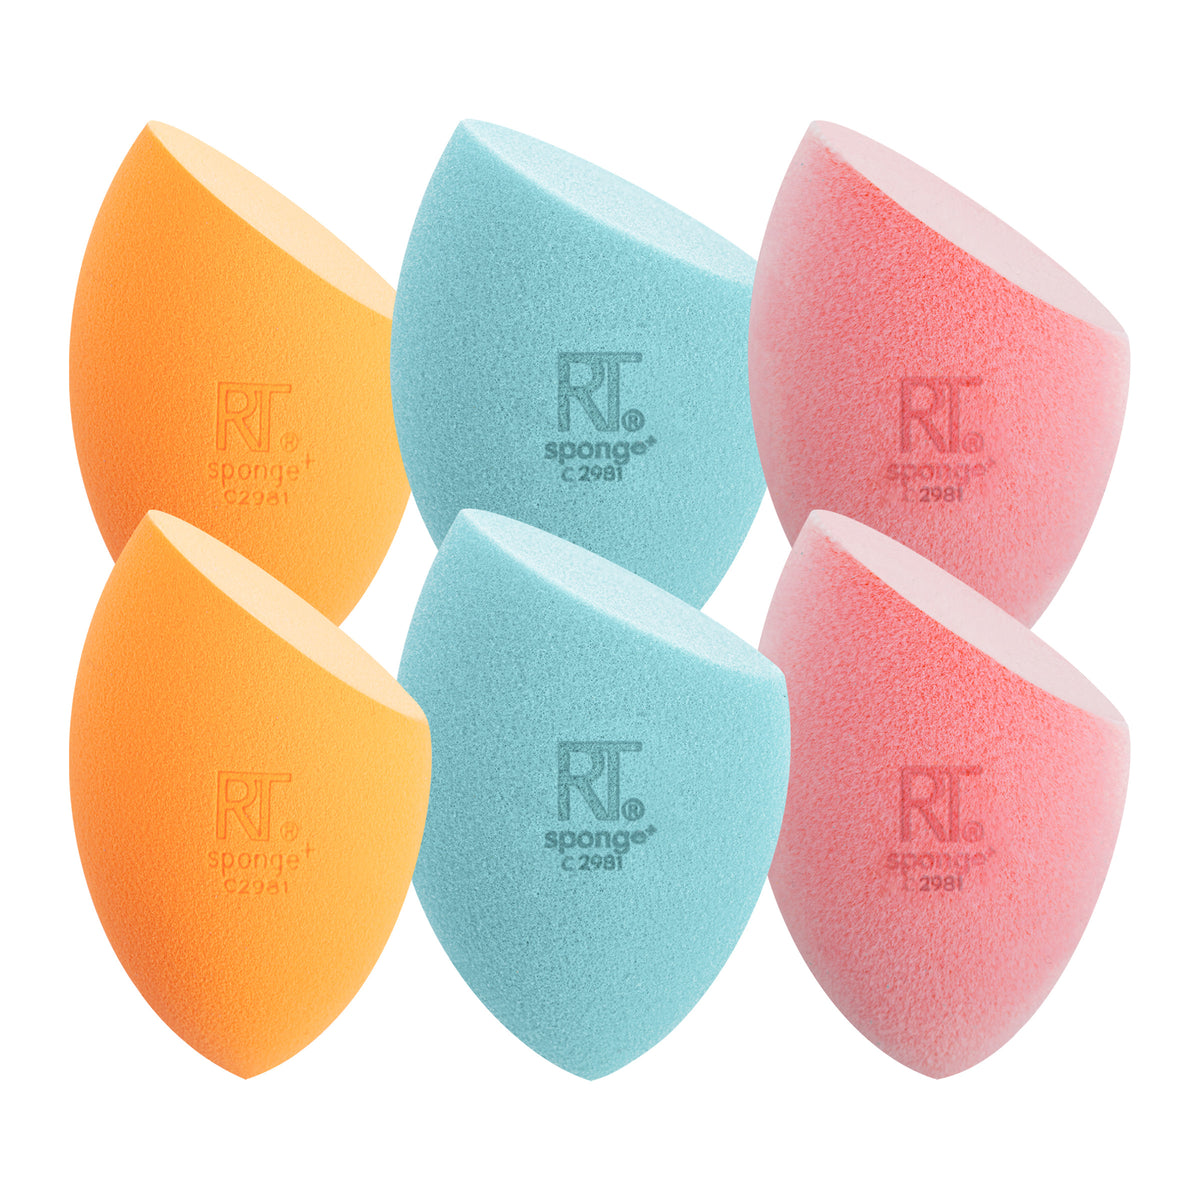 Real Techniques Chroma Miracle Complexion Sponge & Miracle Powder